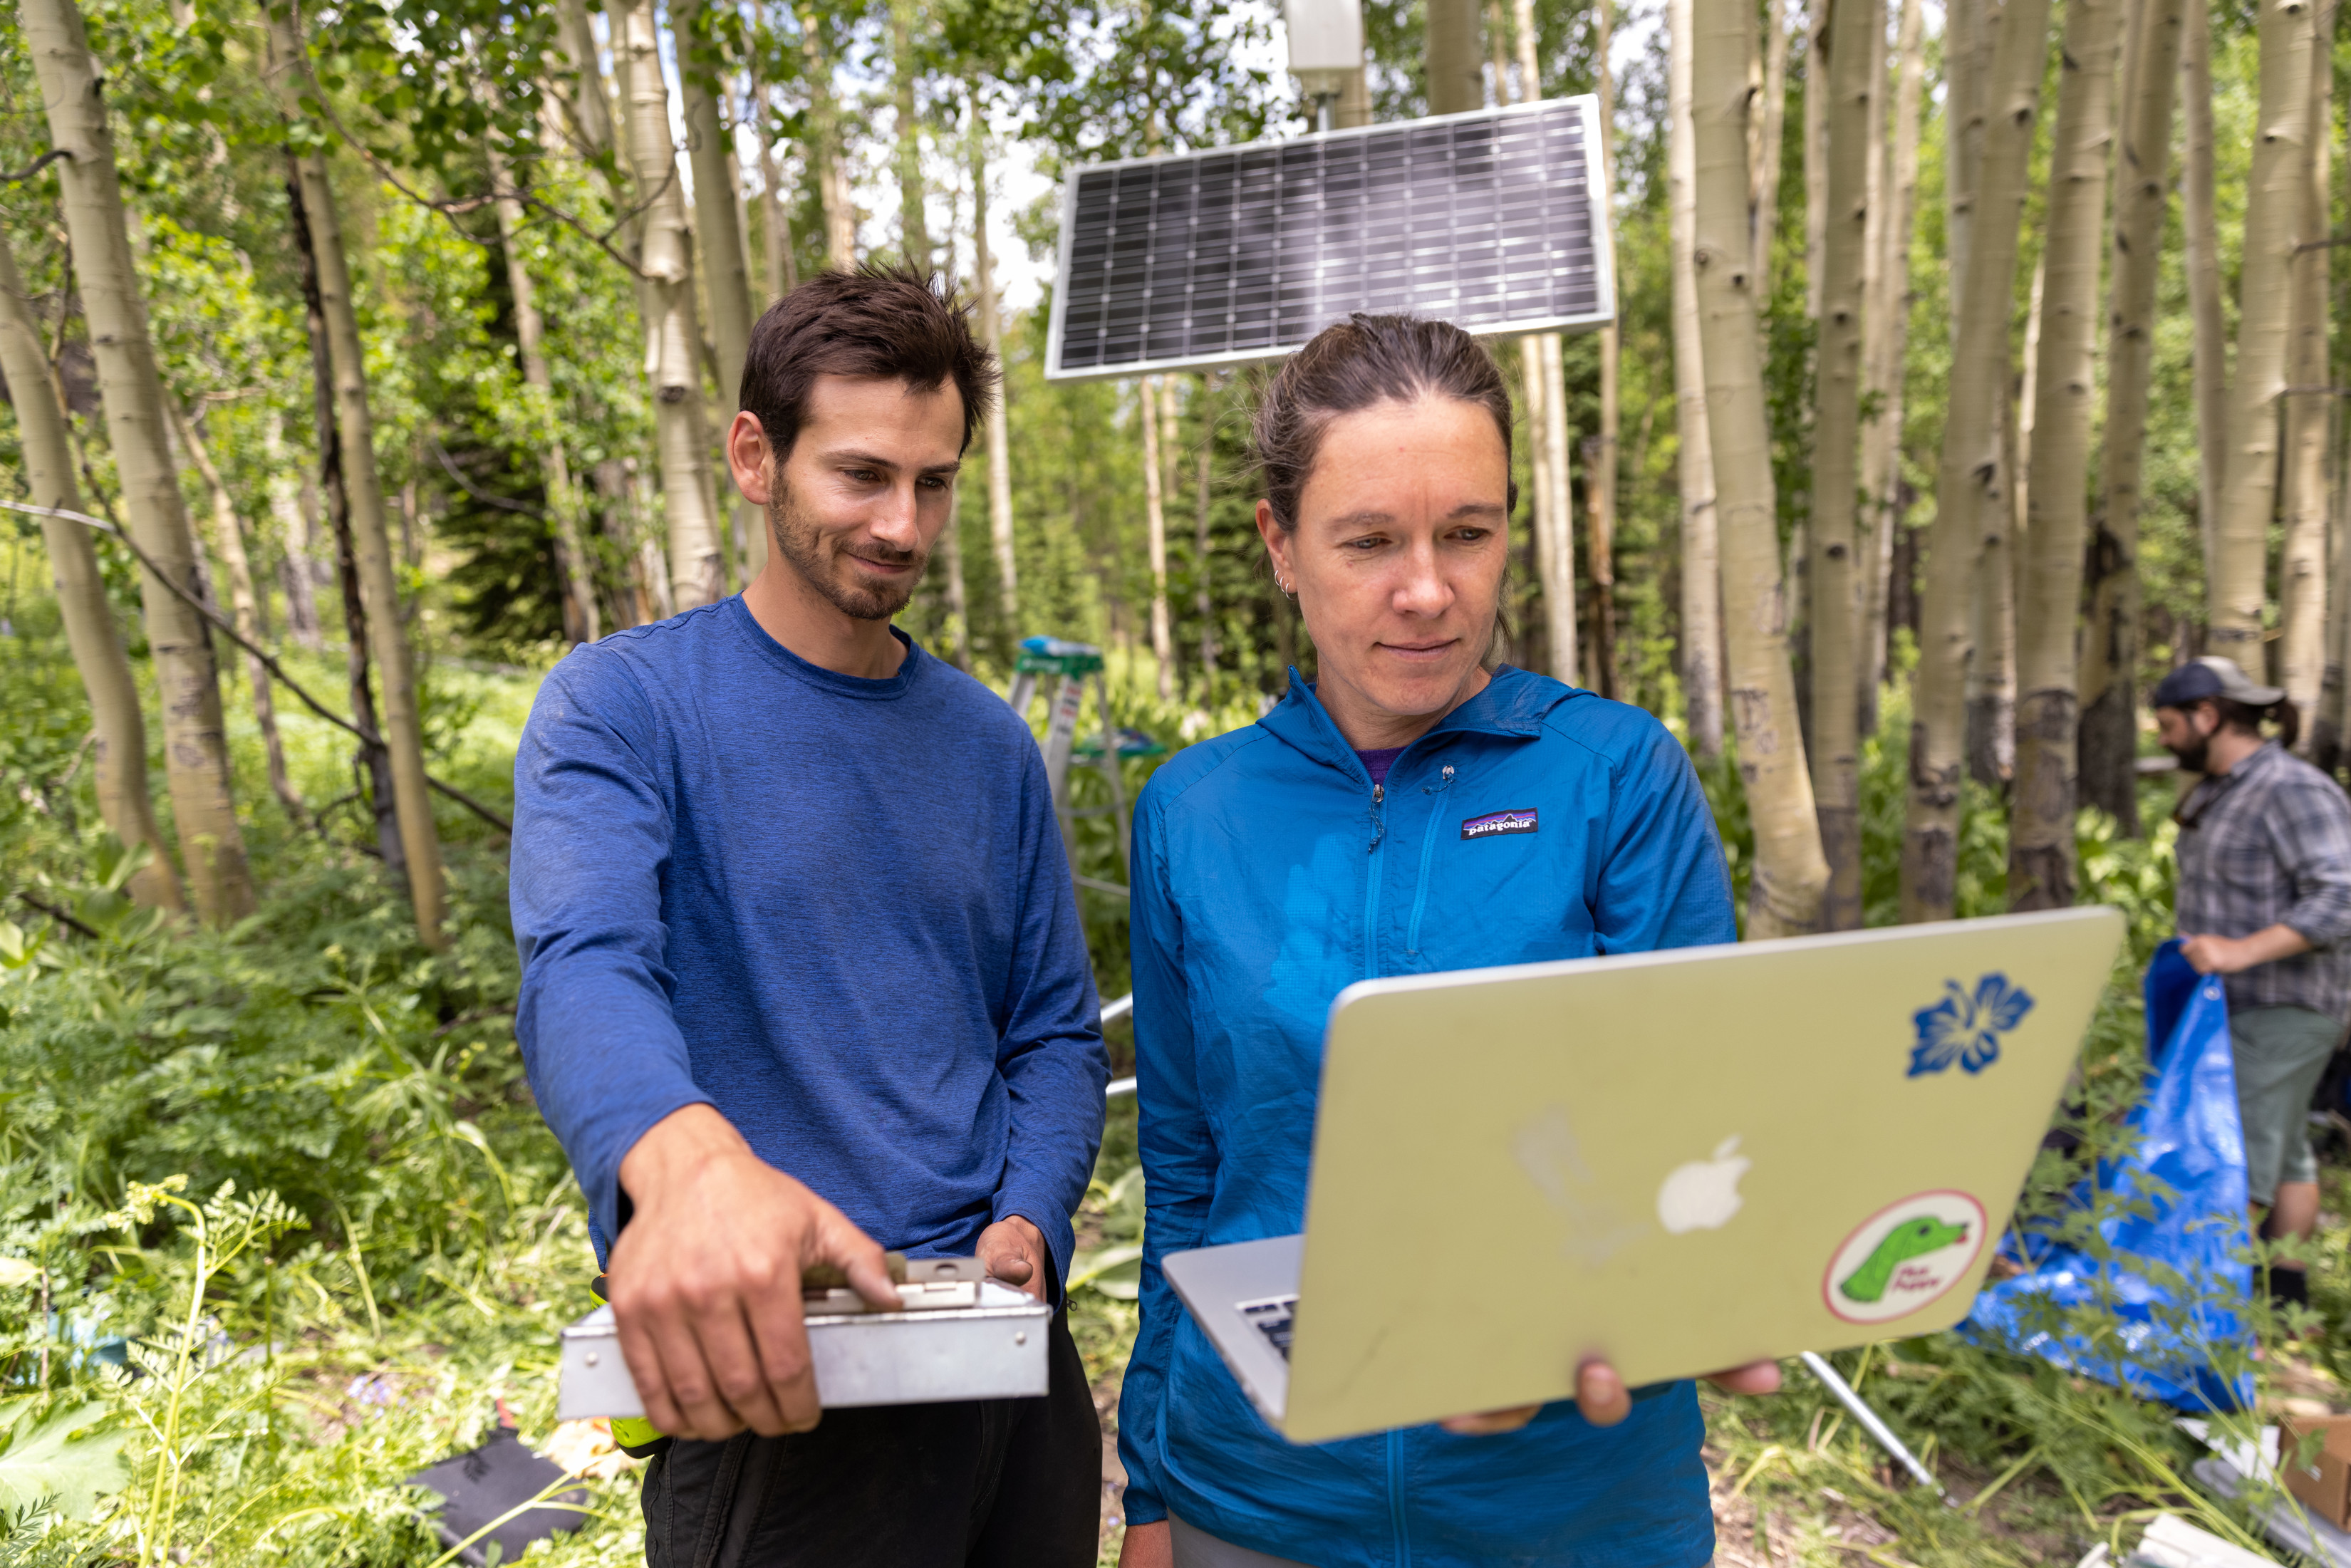 PHD students perform Carbone research in the forest.